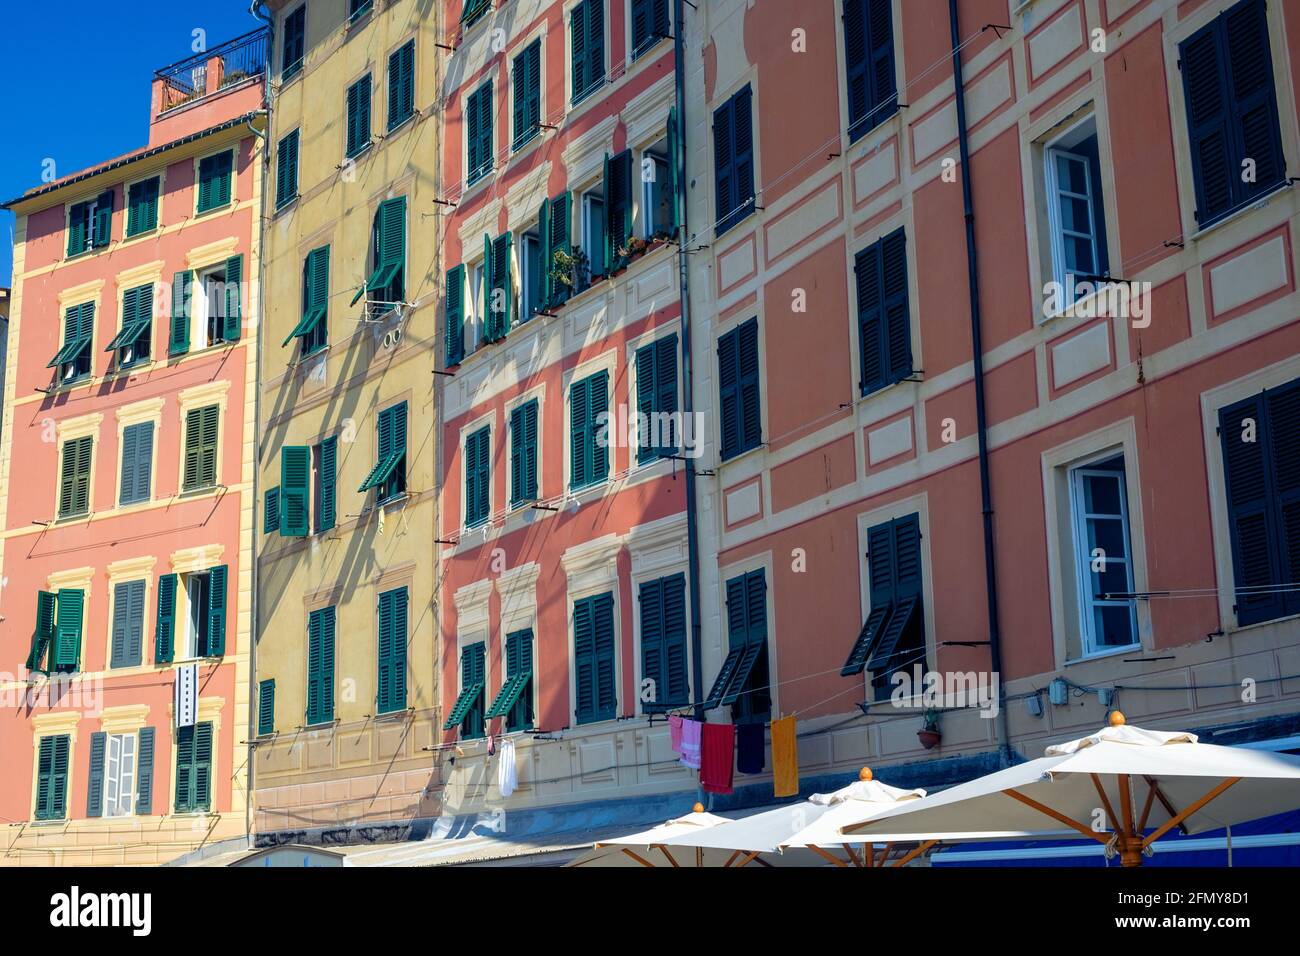 Front facades of a row of tall, ancient houses in Camogli. These high, colorful buildings are typical of this town. Stock Photo